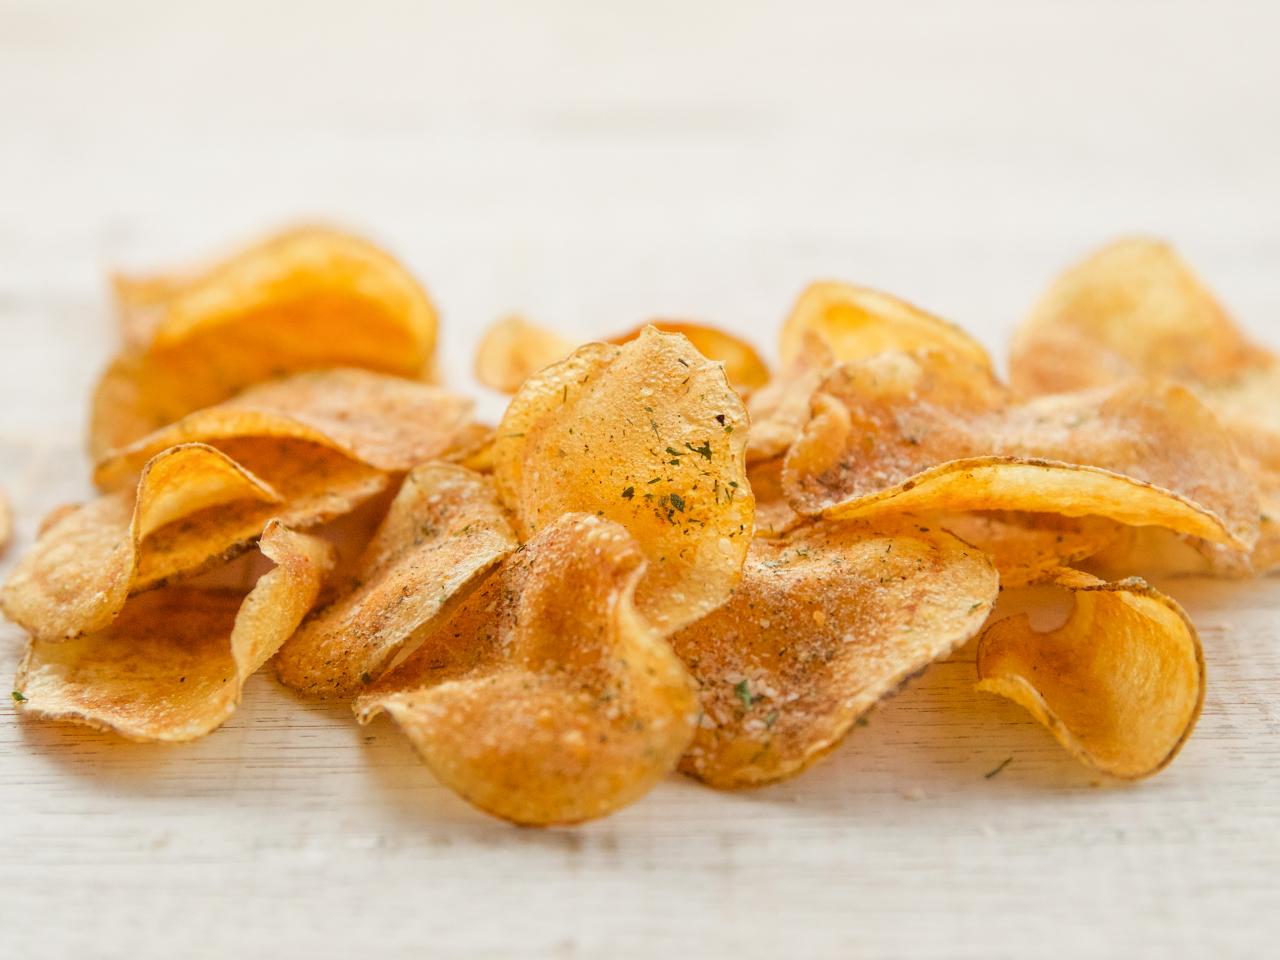 Spiced Up Potato Chips Recipe, Ree Drummond